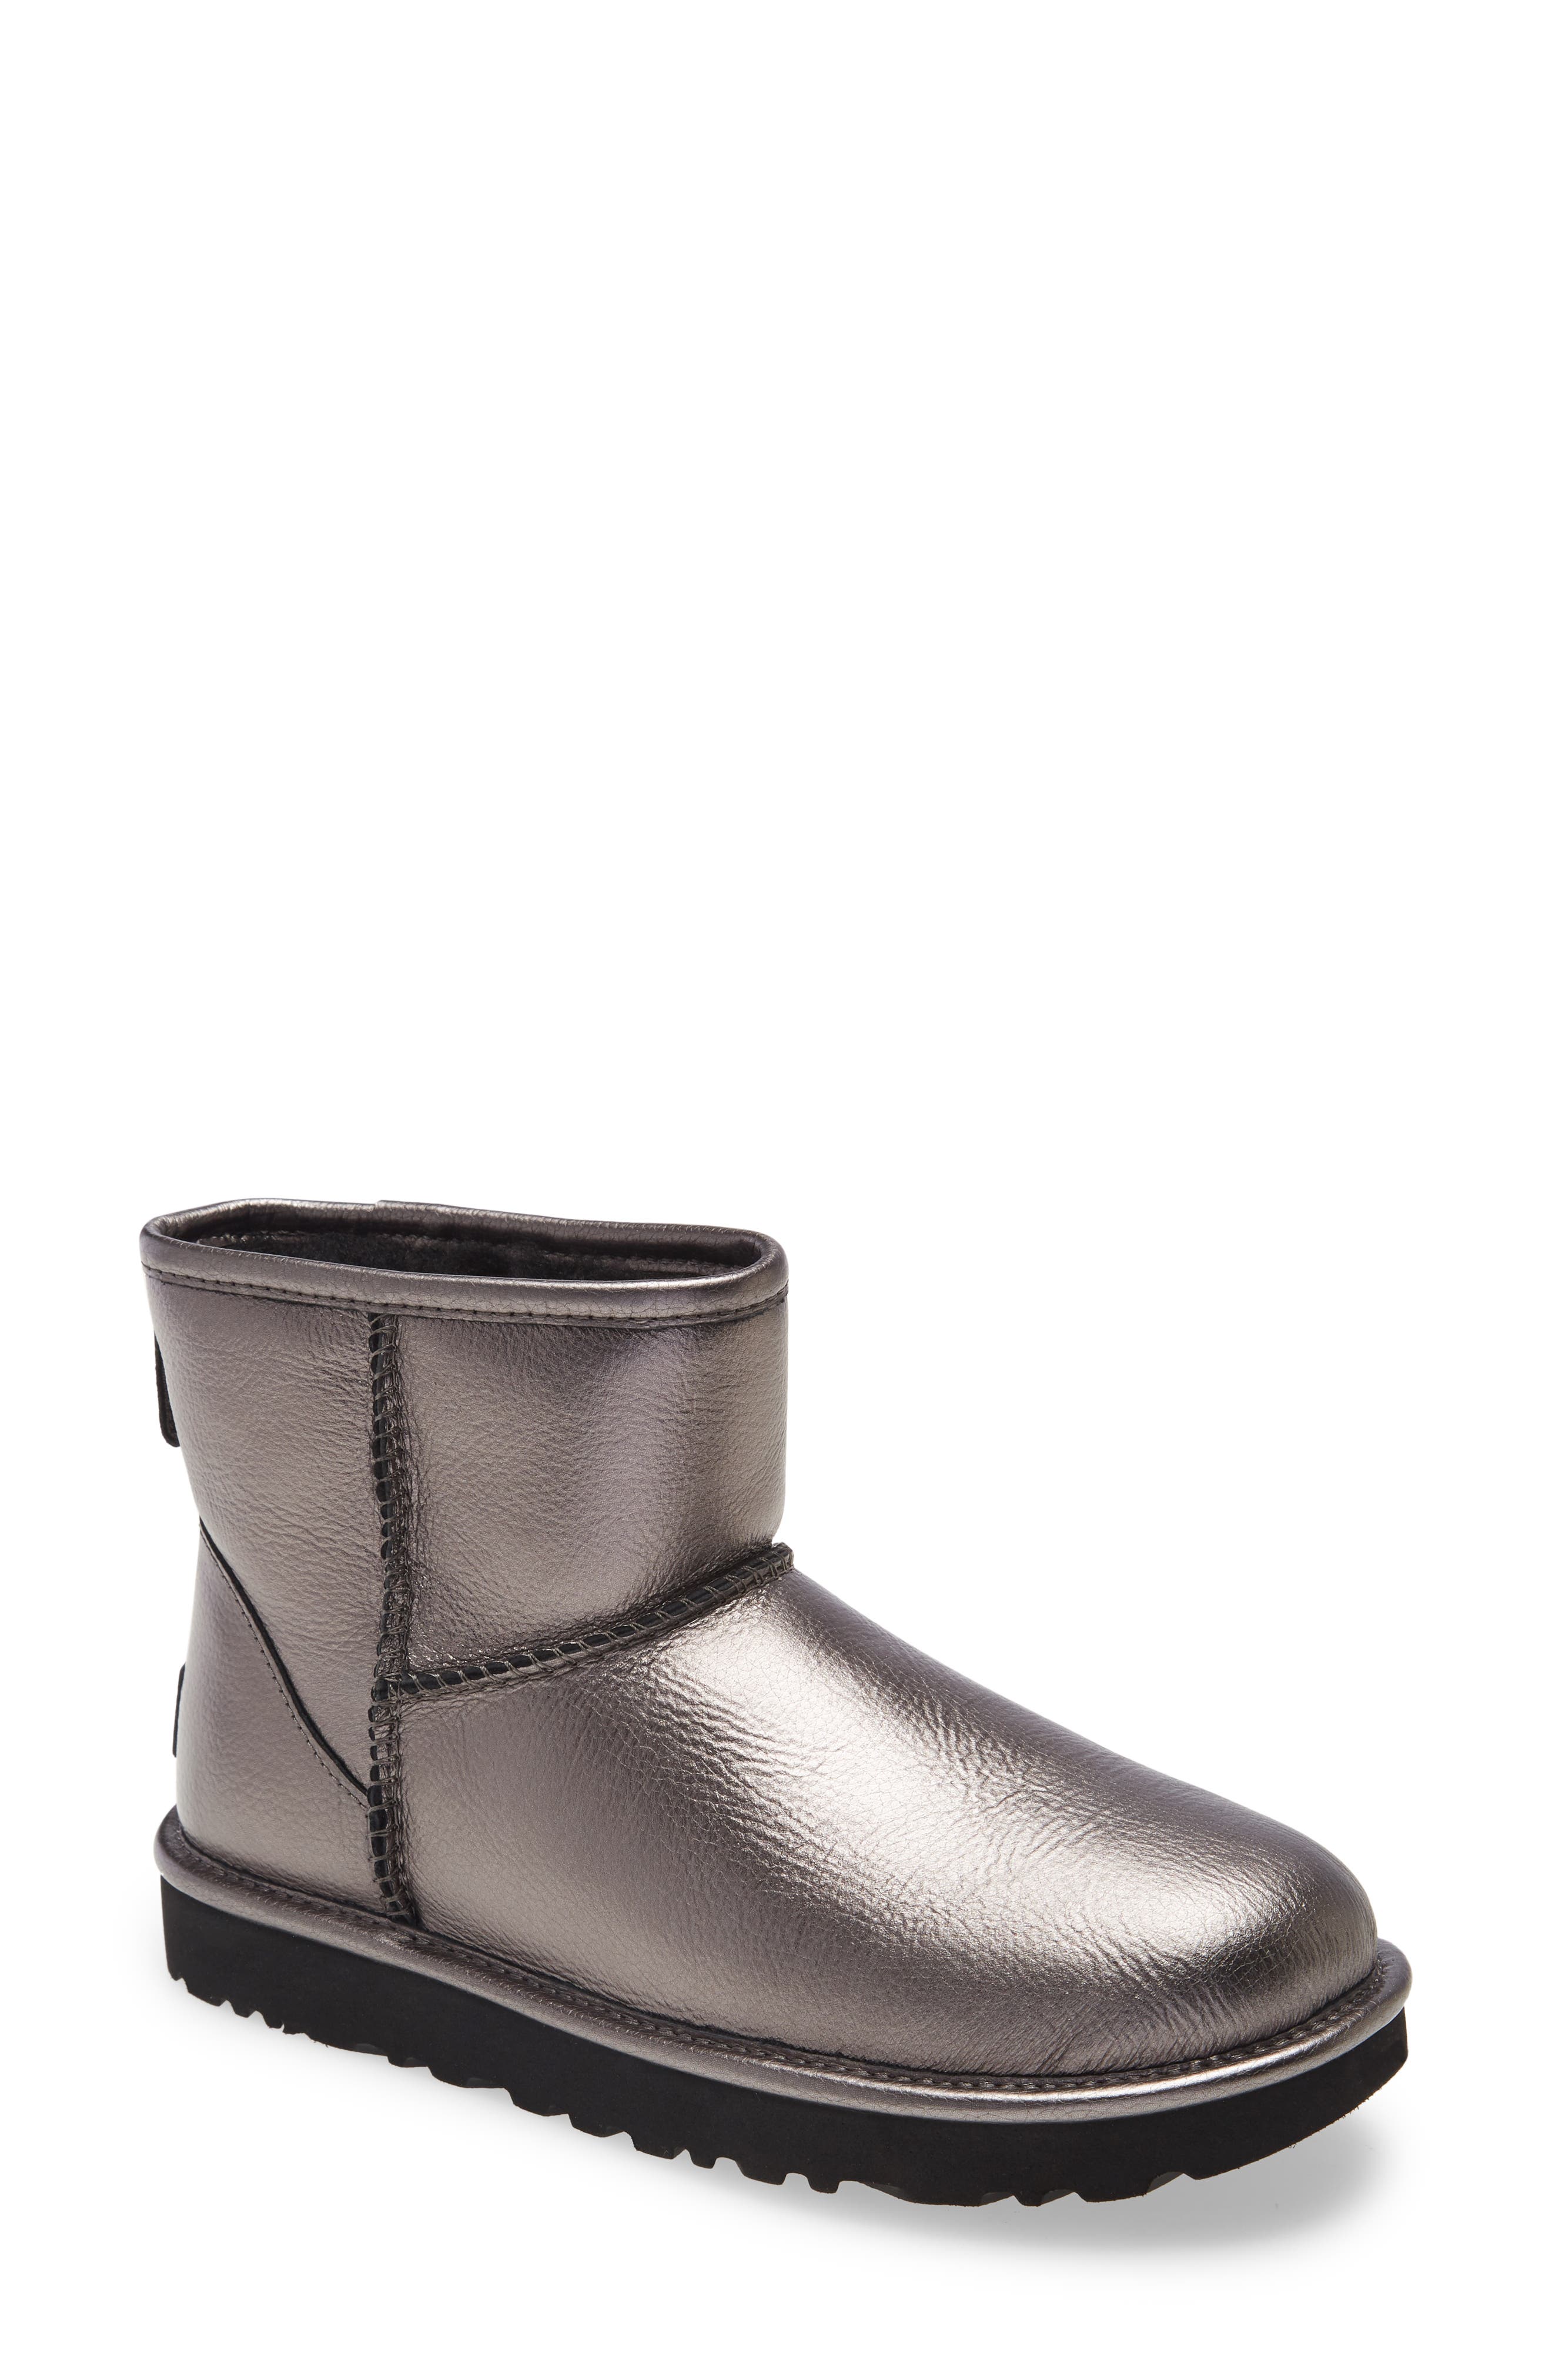 uggs silver metallic boots